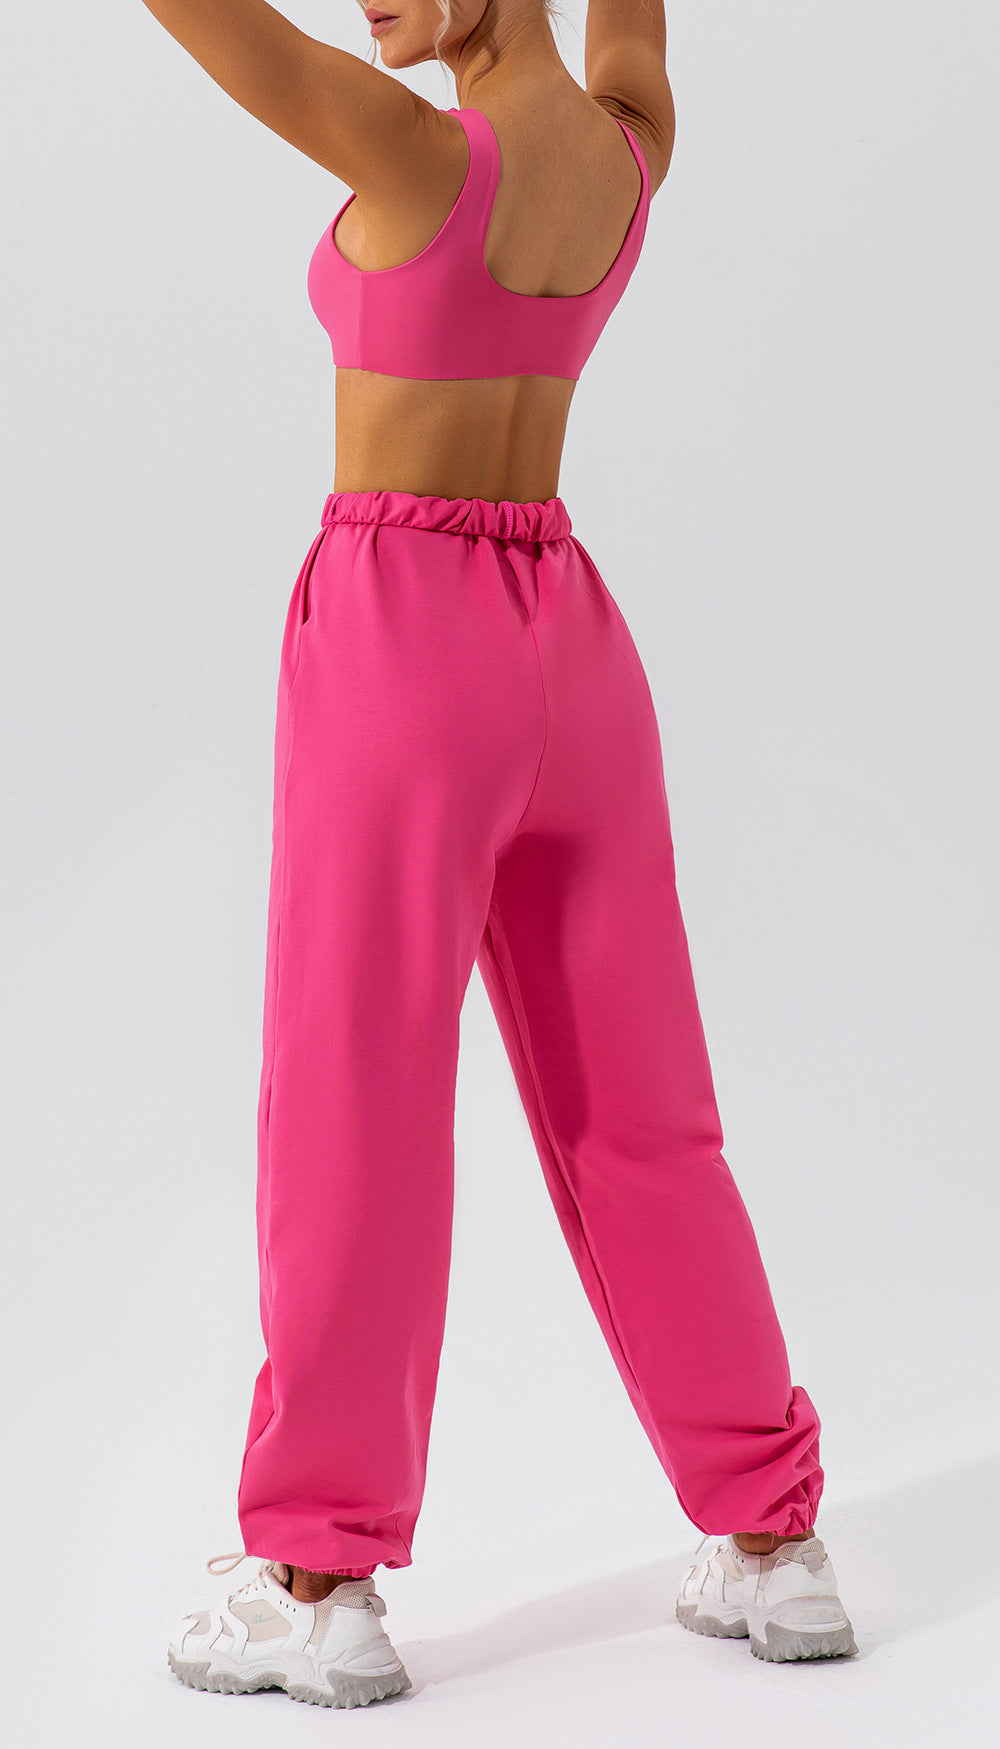 Summer Outfits | Hot Pink Cotton Sweatpants